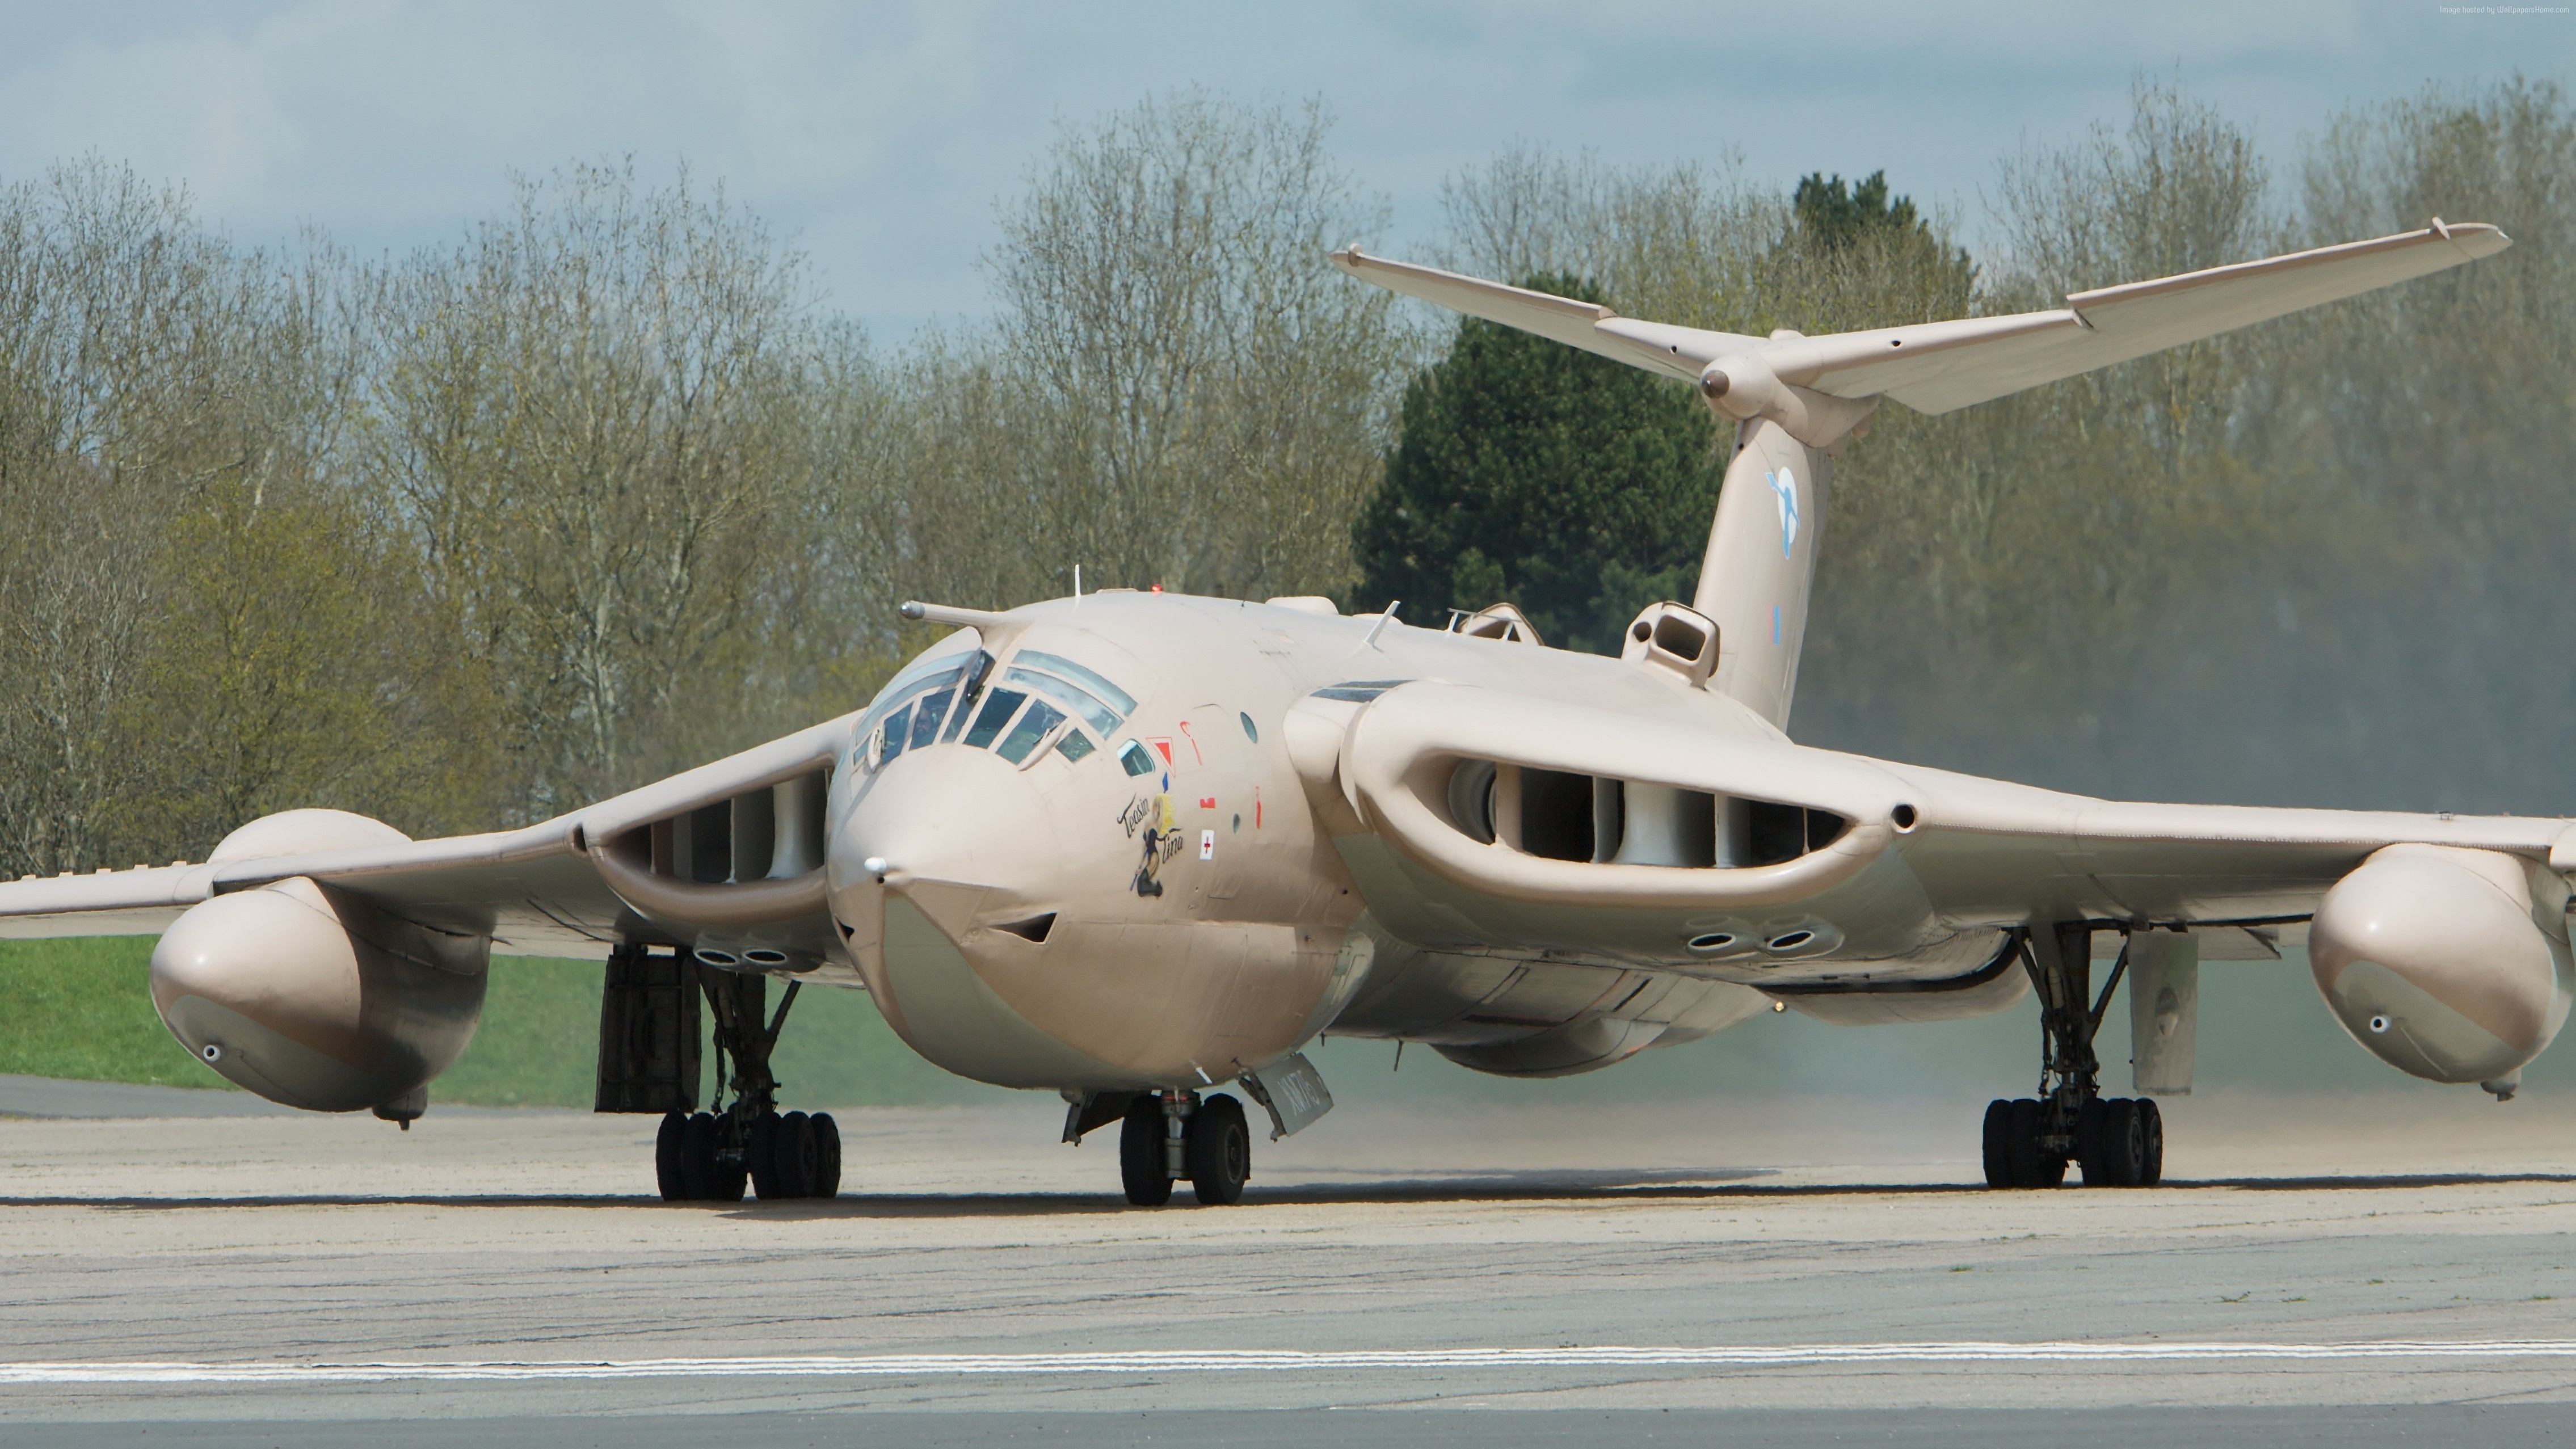 High Resolution Wallpaper | Handley Page Victor 4540x2554 px